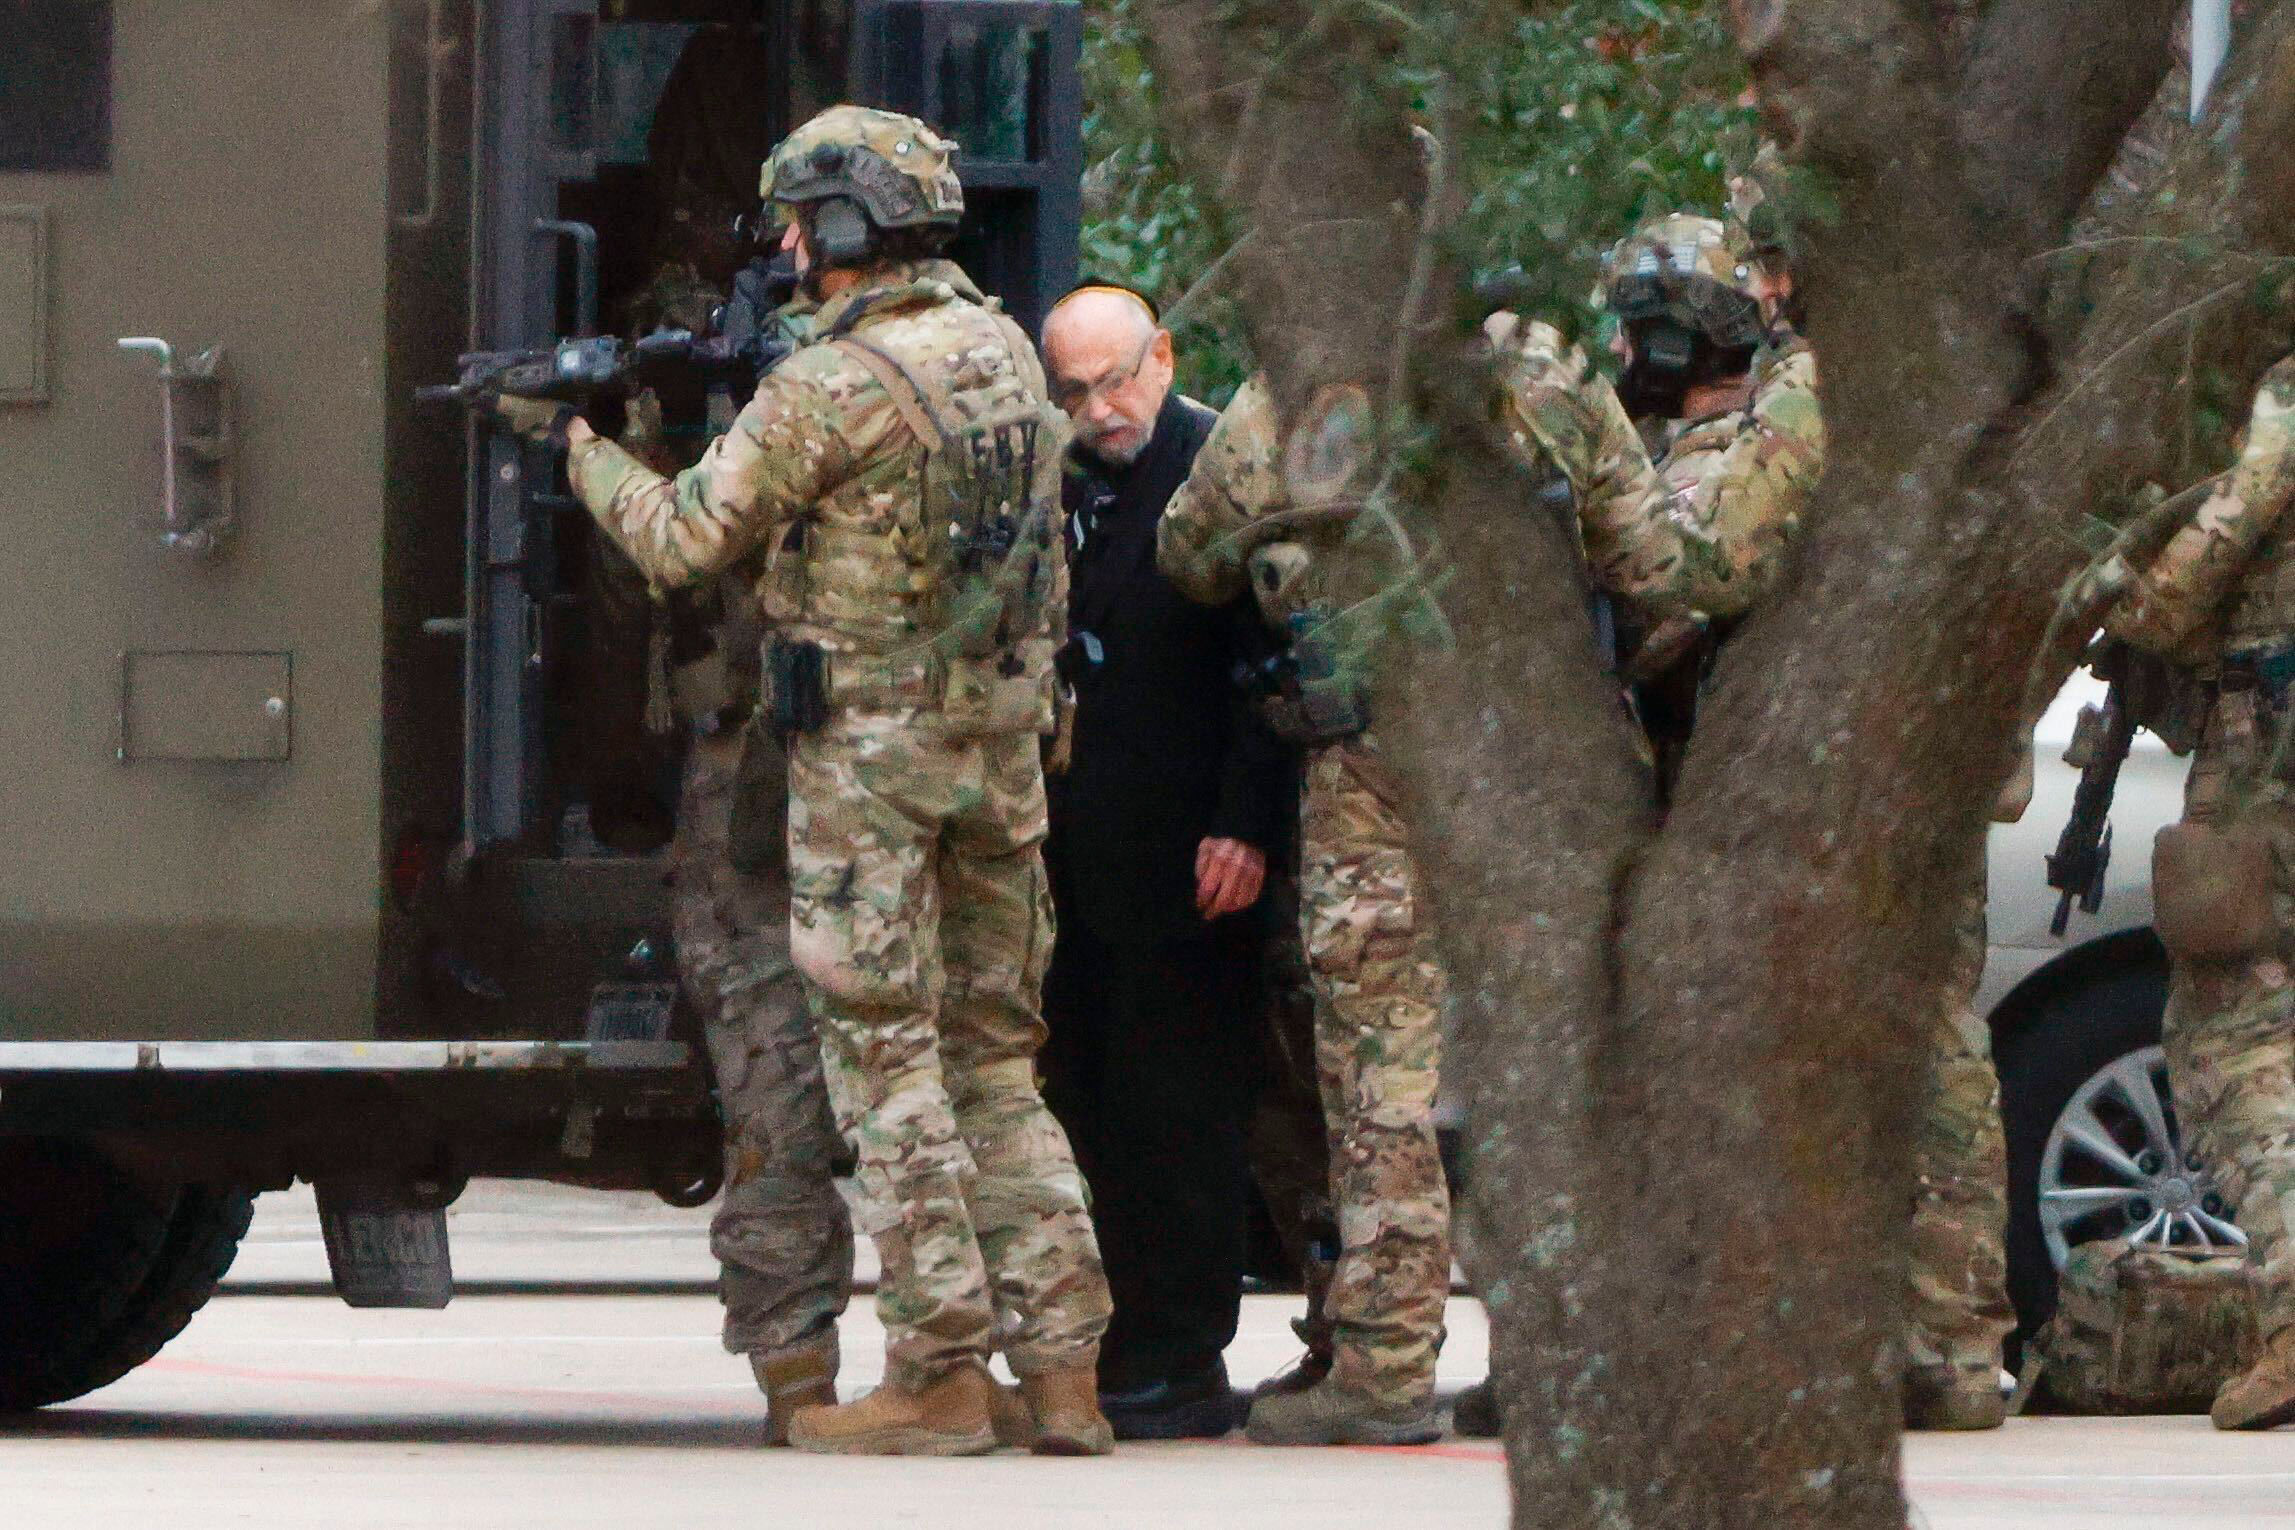 All hostages safely out: Texas Governor on Colleyville synagogue incident